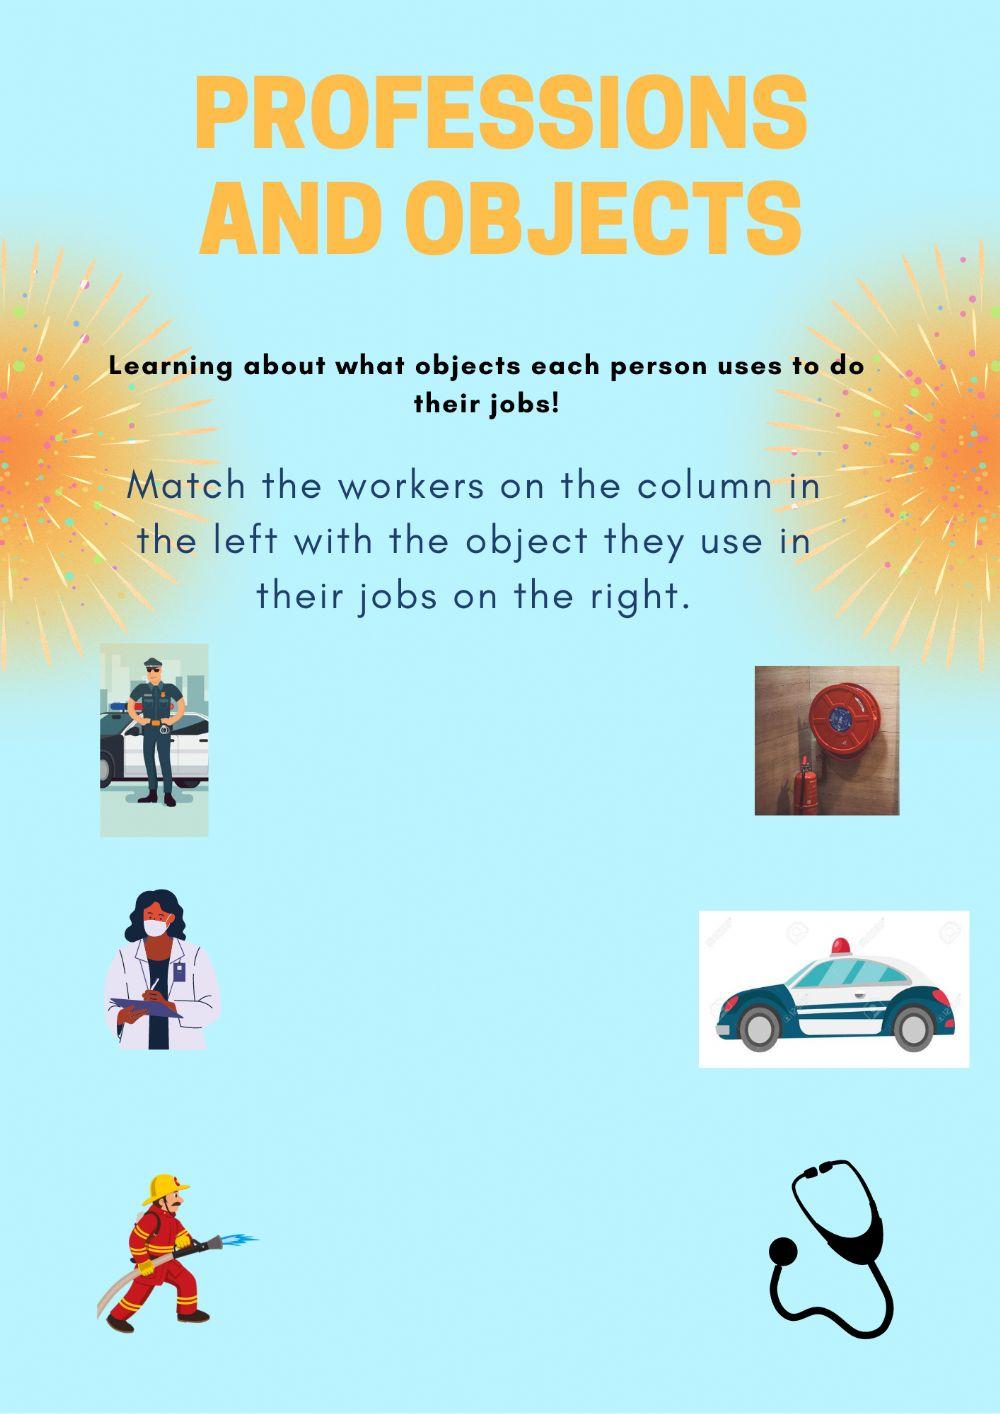 Professions and objects